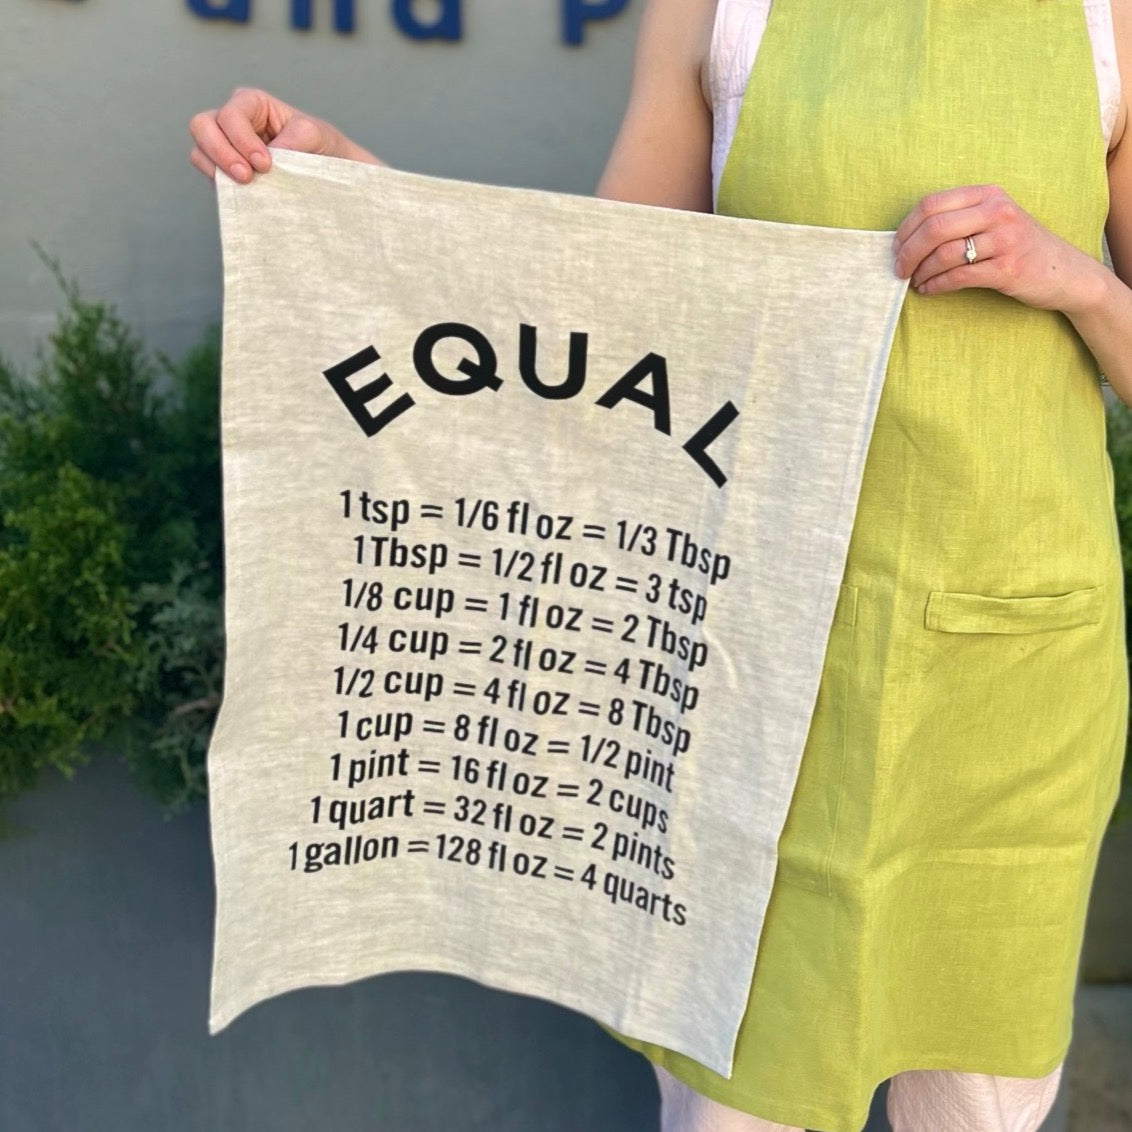 Home cook holding tea towel printed with common unit conversions used for cooking and baking.